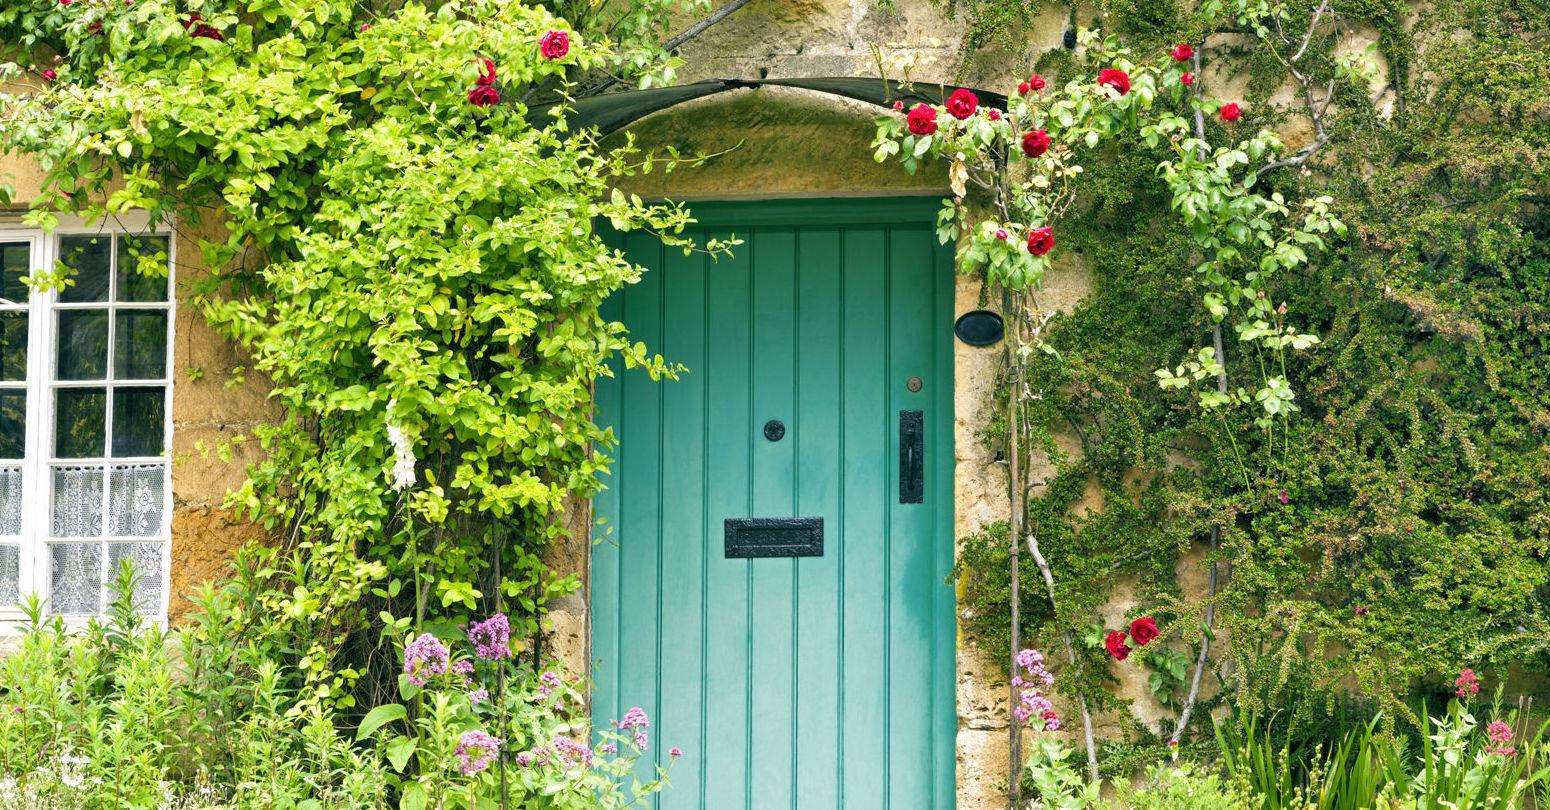 Do you dream of roses round your door?